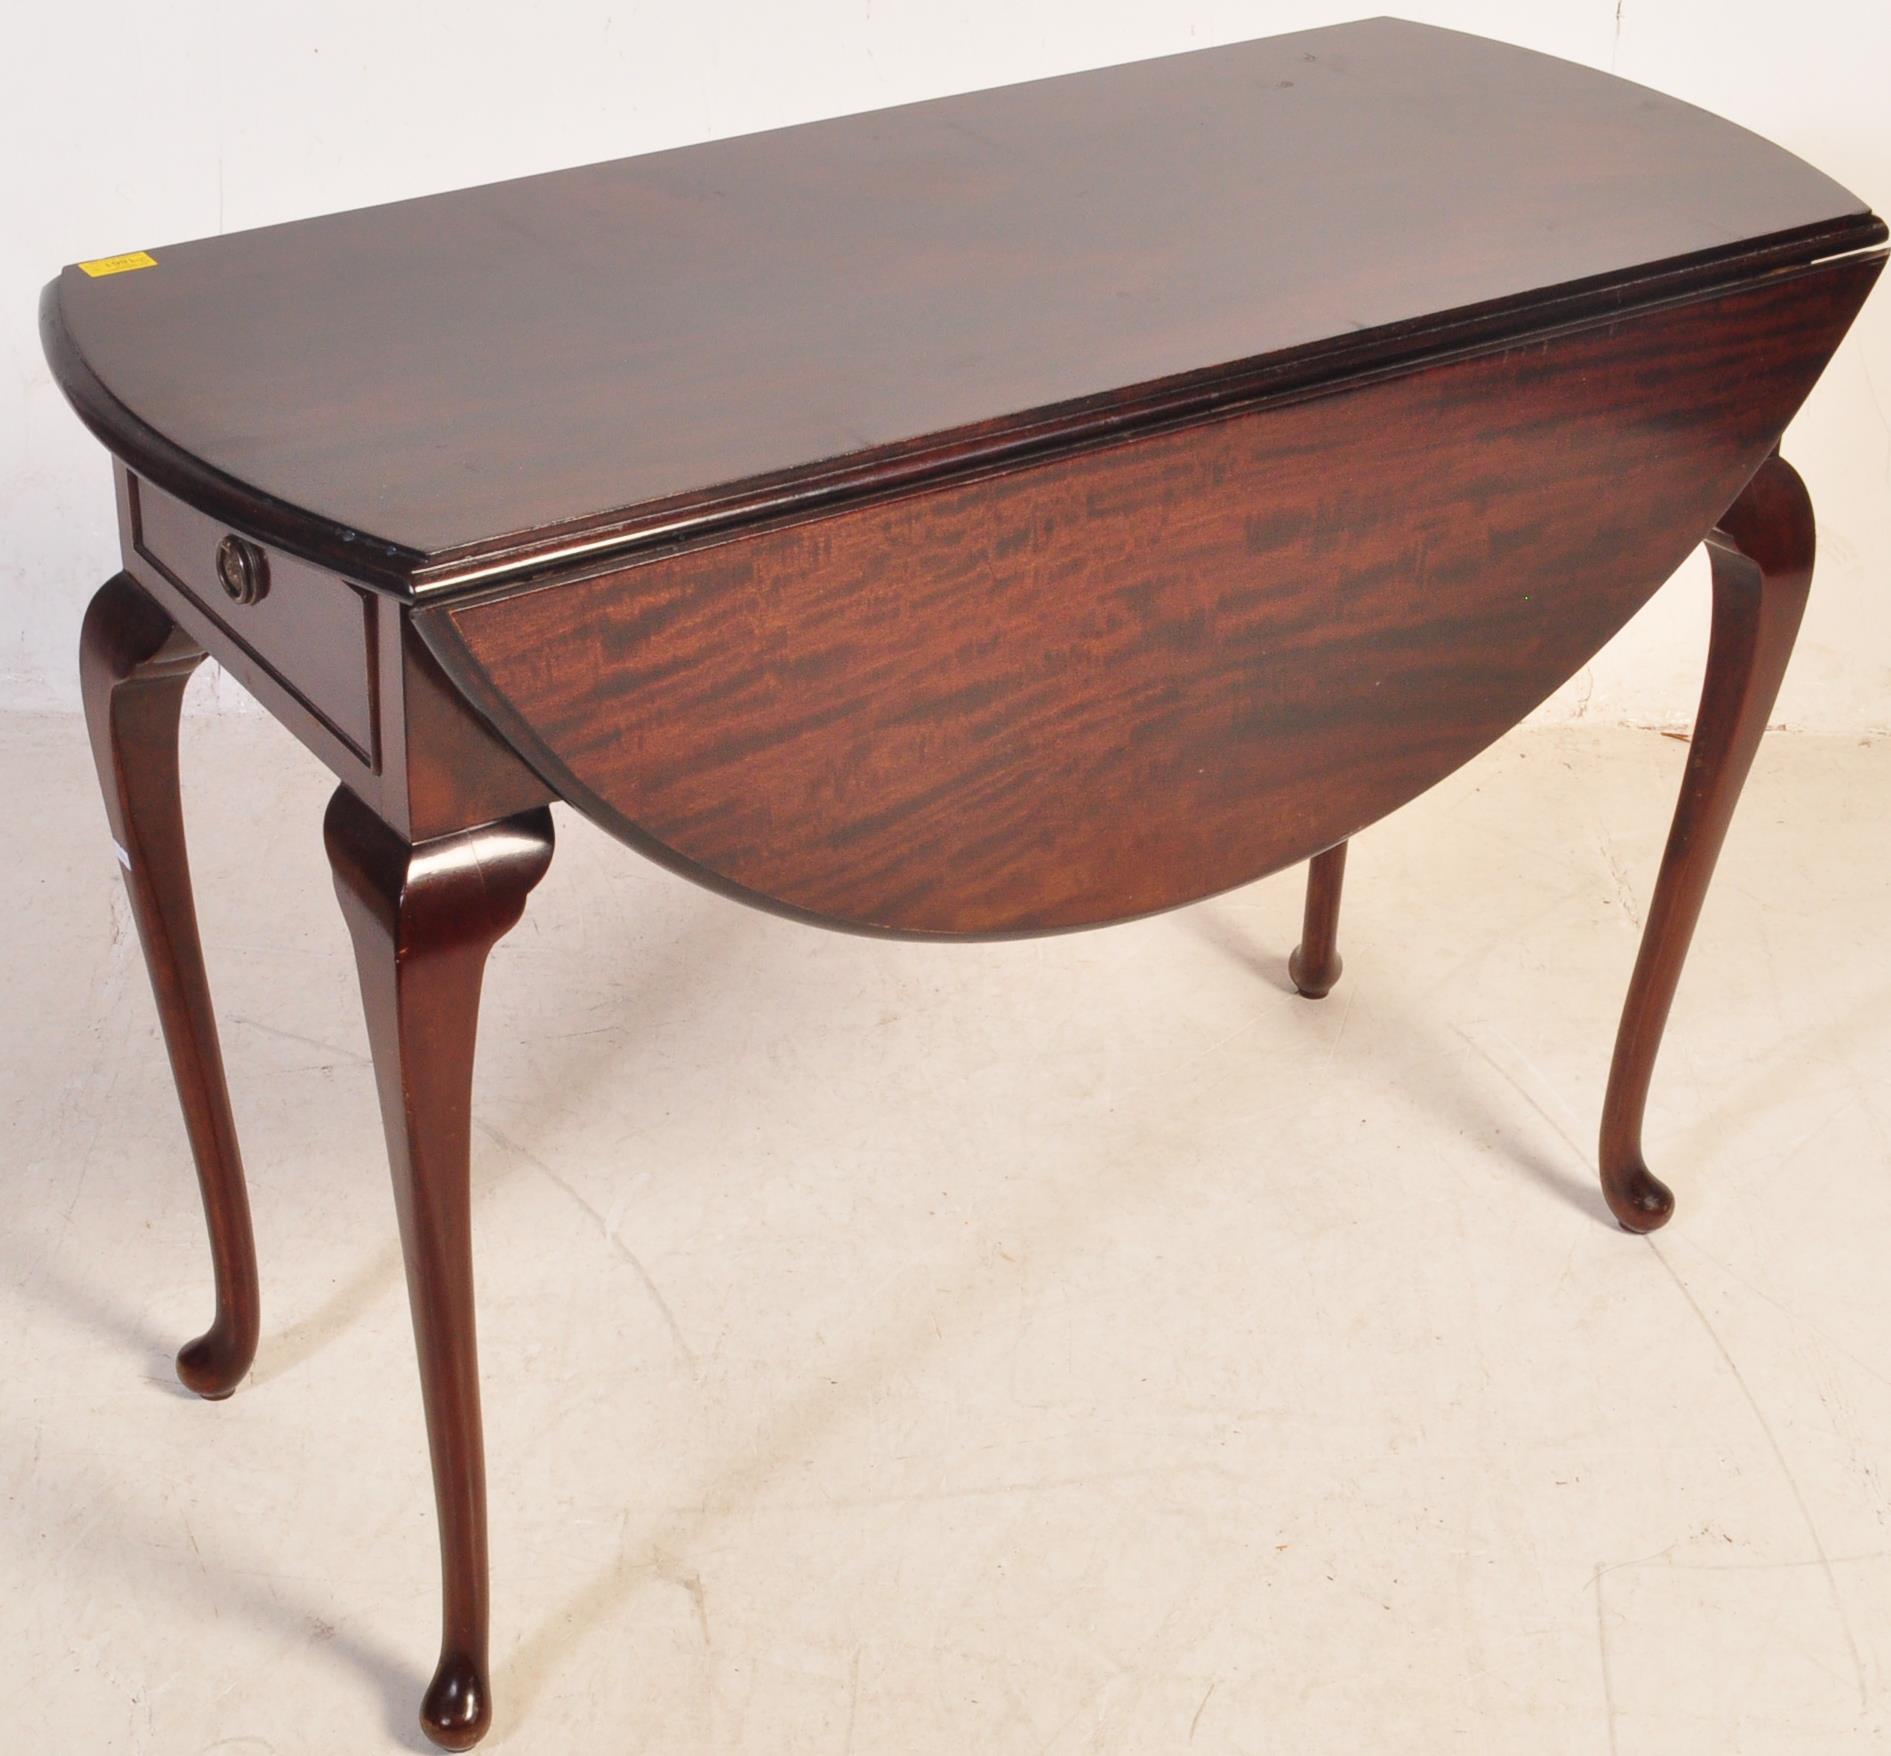 20TH CENTURY QUEEN ANNE REVIVAL AFRICAN MAHOGANY DINING TABLE & CHAIRS - Image 7 of 11